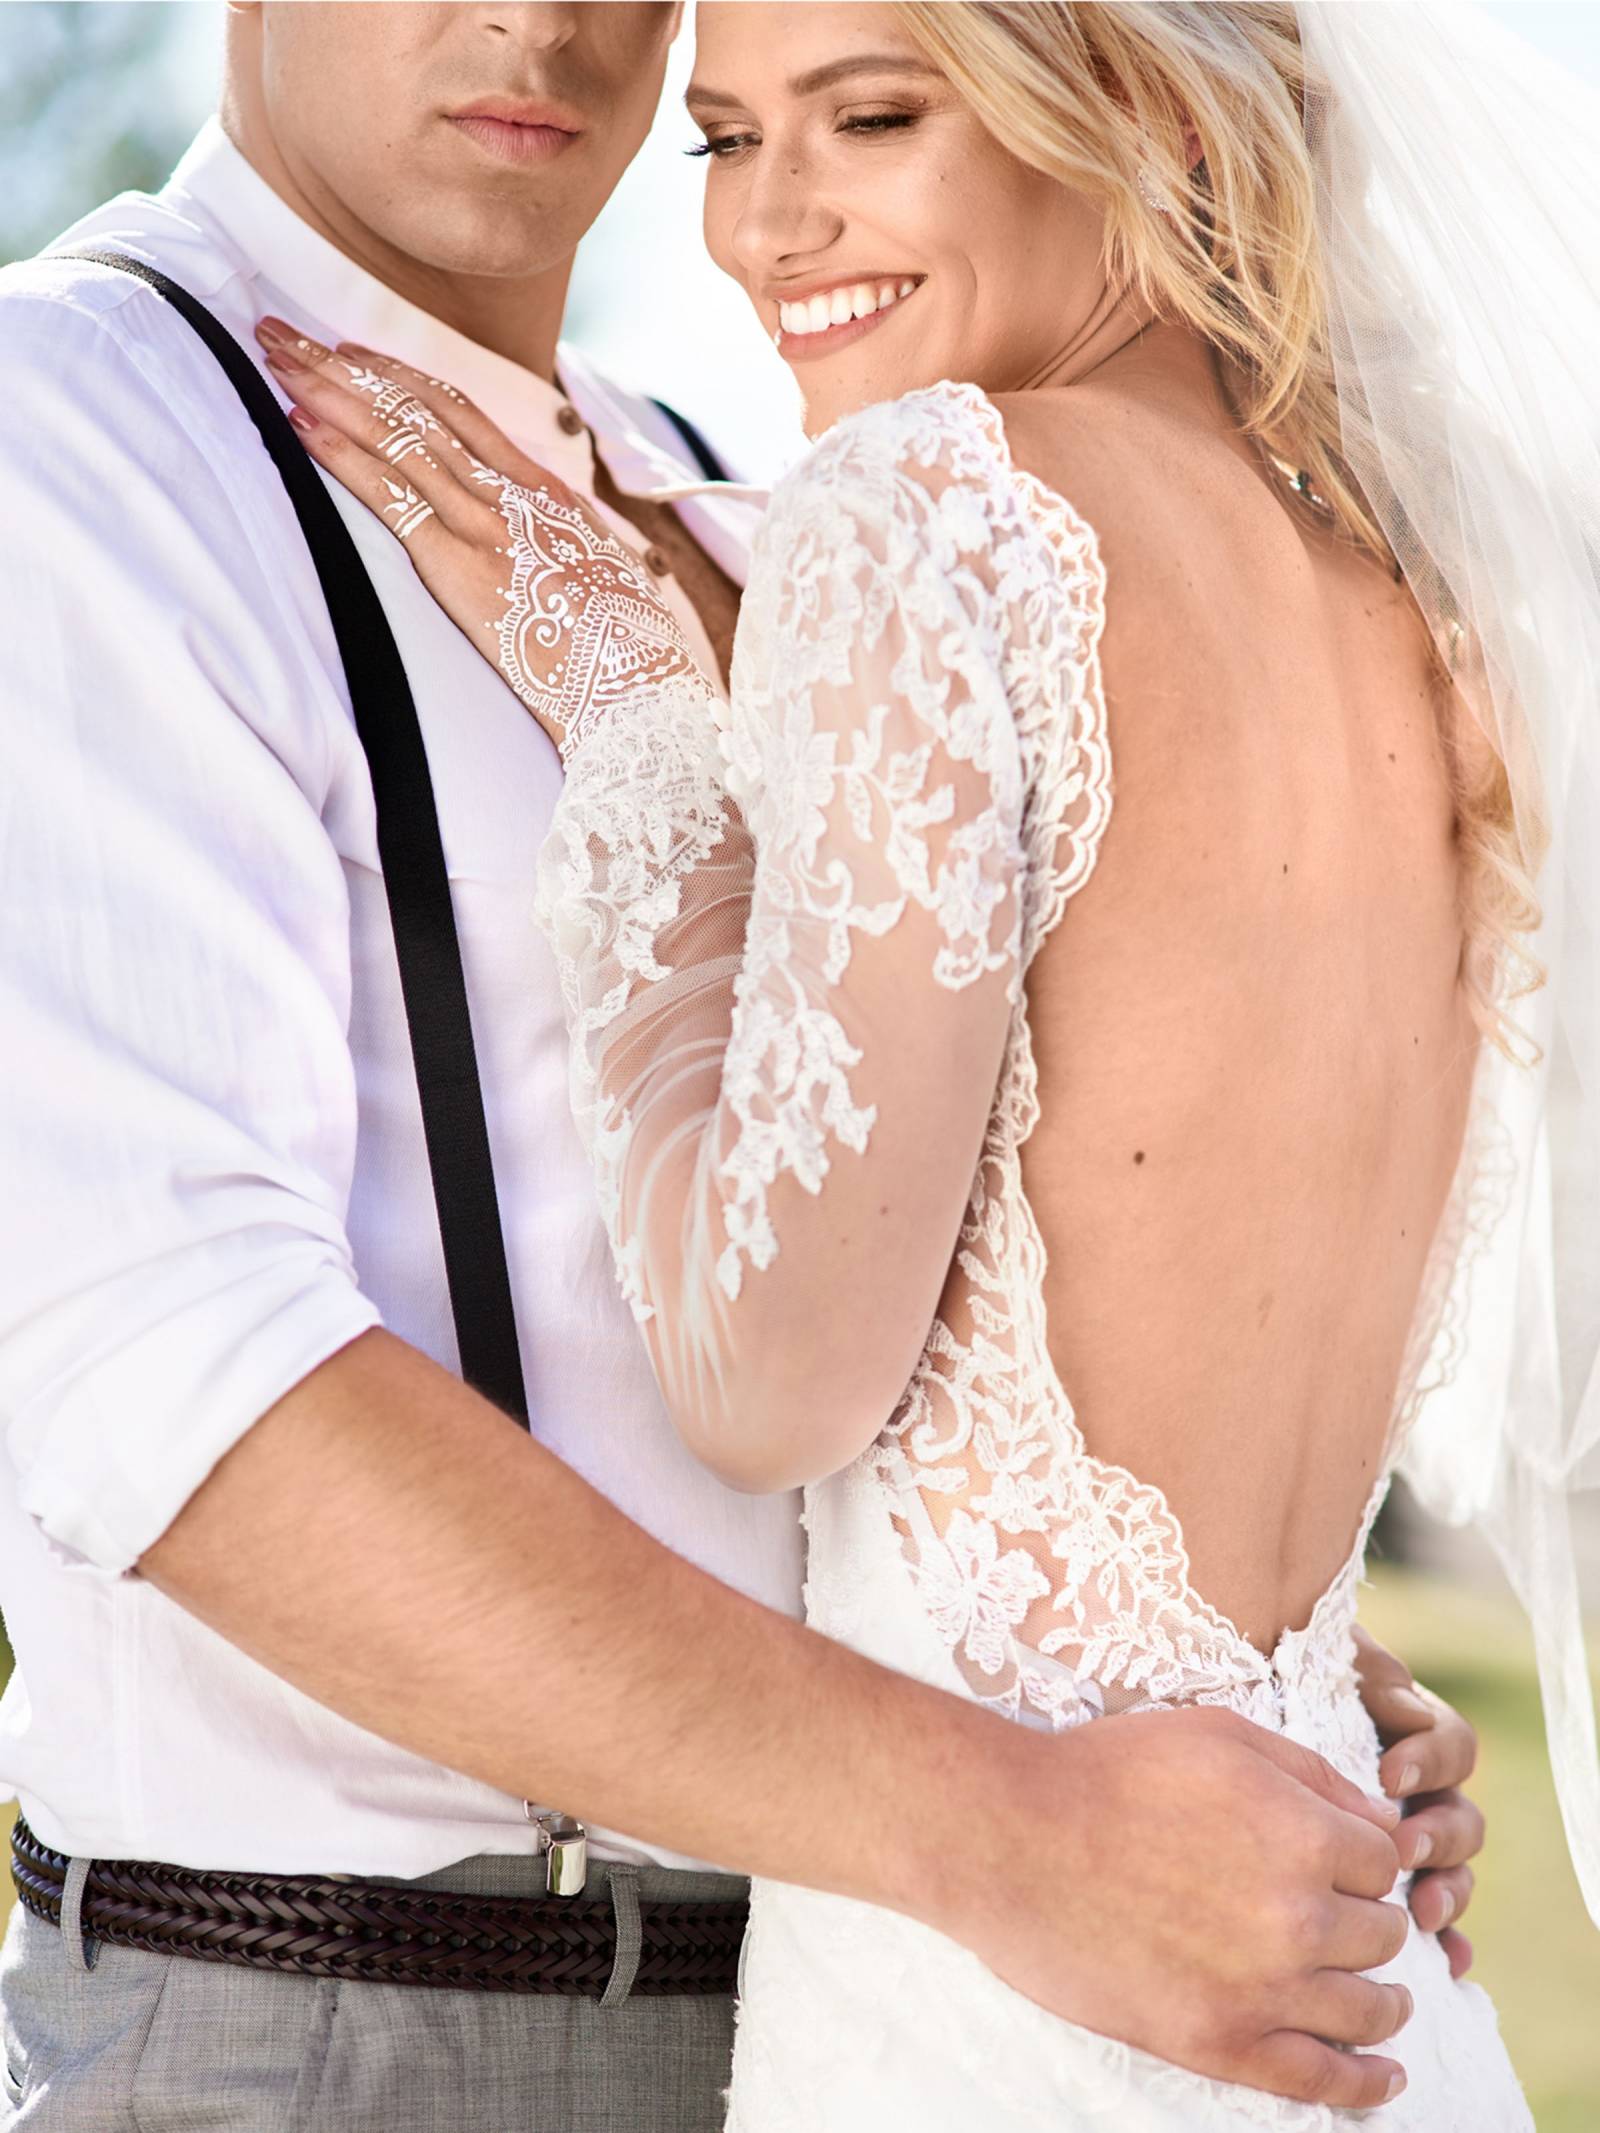 bride in backless wedding gown leaning against groom in lavender shirt with suspenders